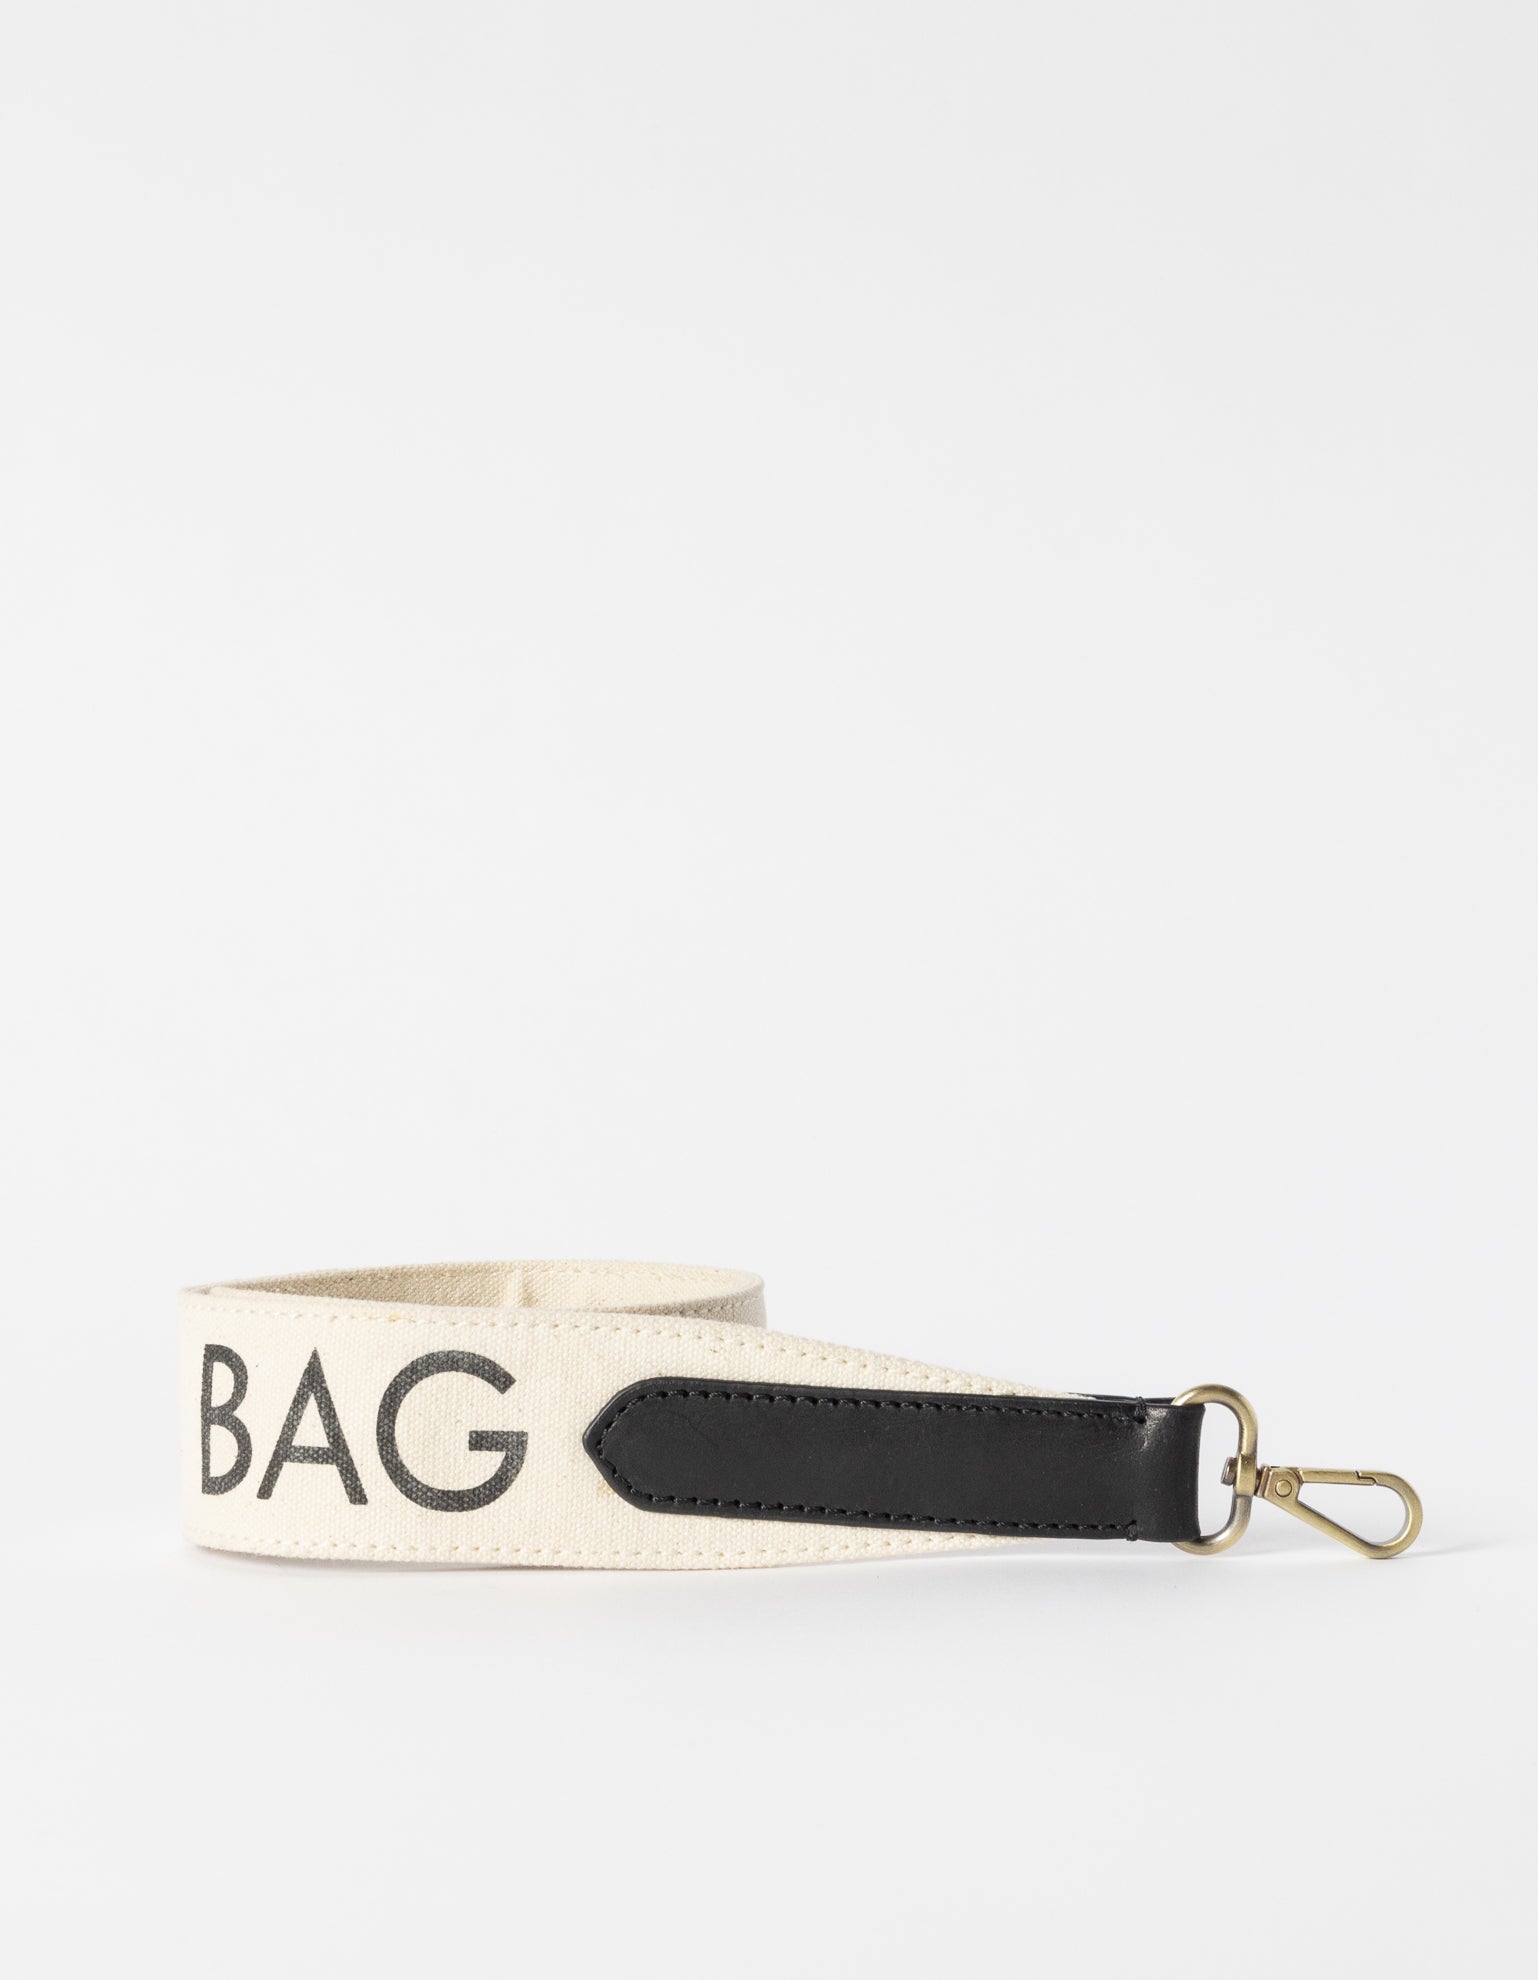 Canvas cotton handbag strap with leather details and logo print. product image